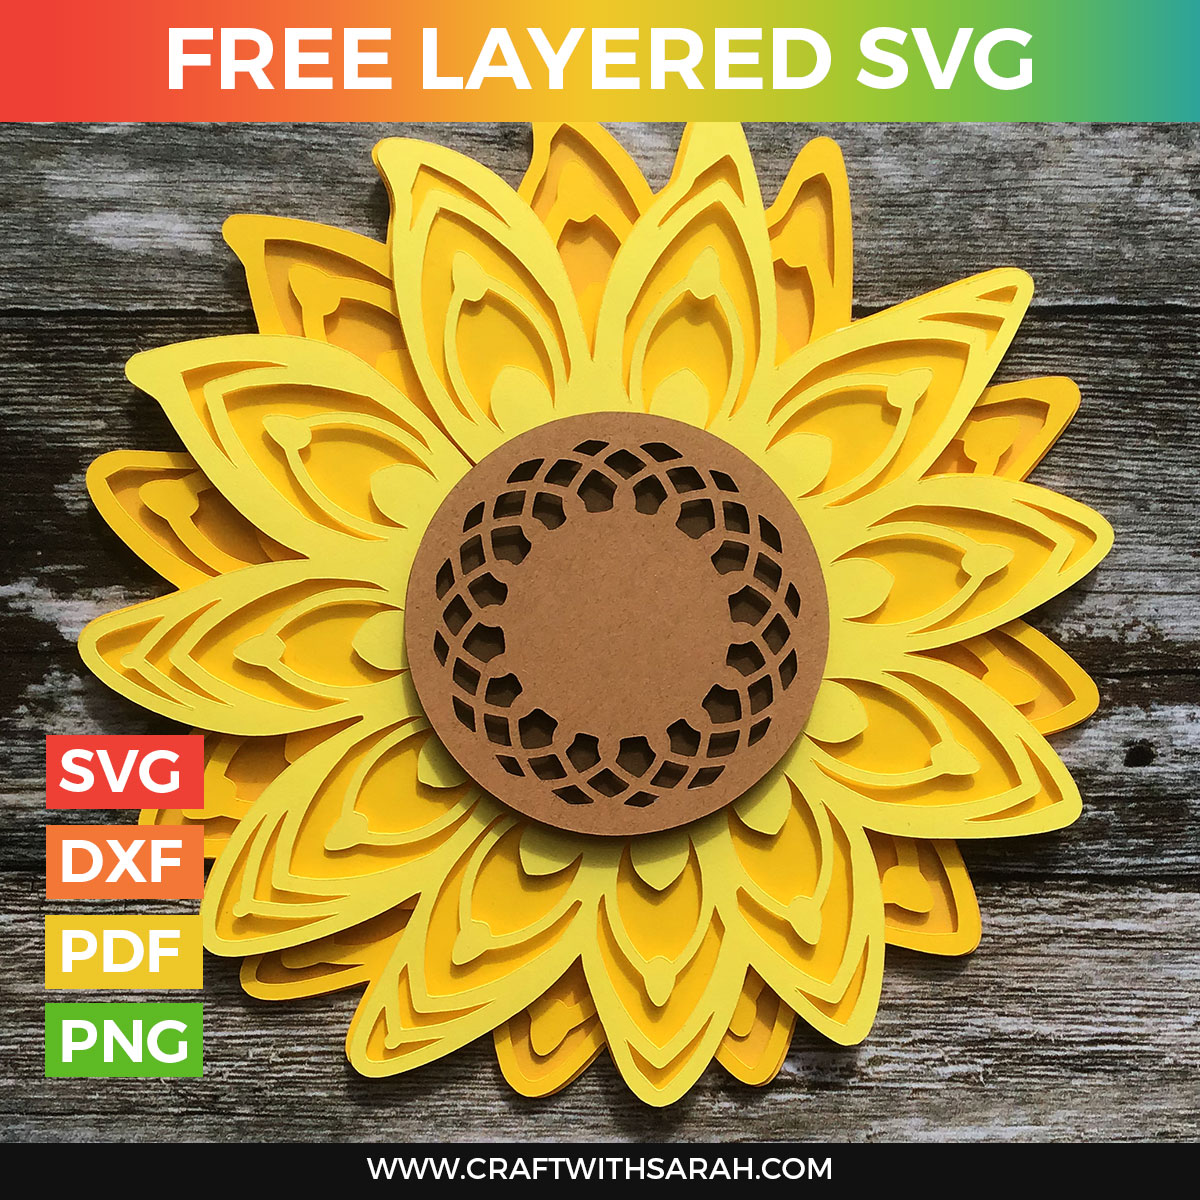 47+ Download 3d Layered SVG Free - Download Free SVG Cut Files and